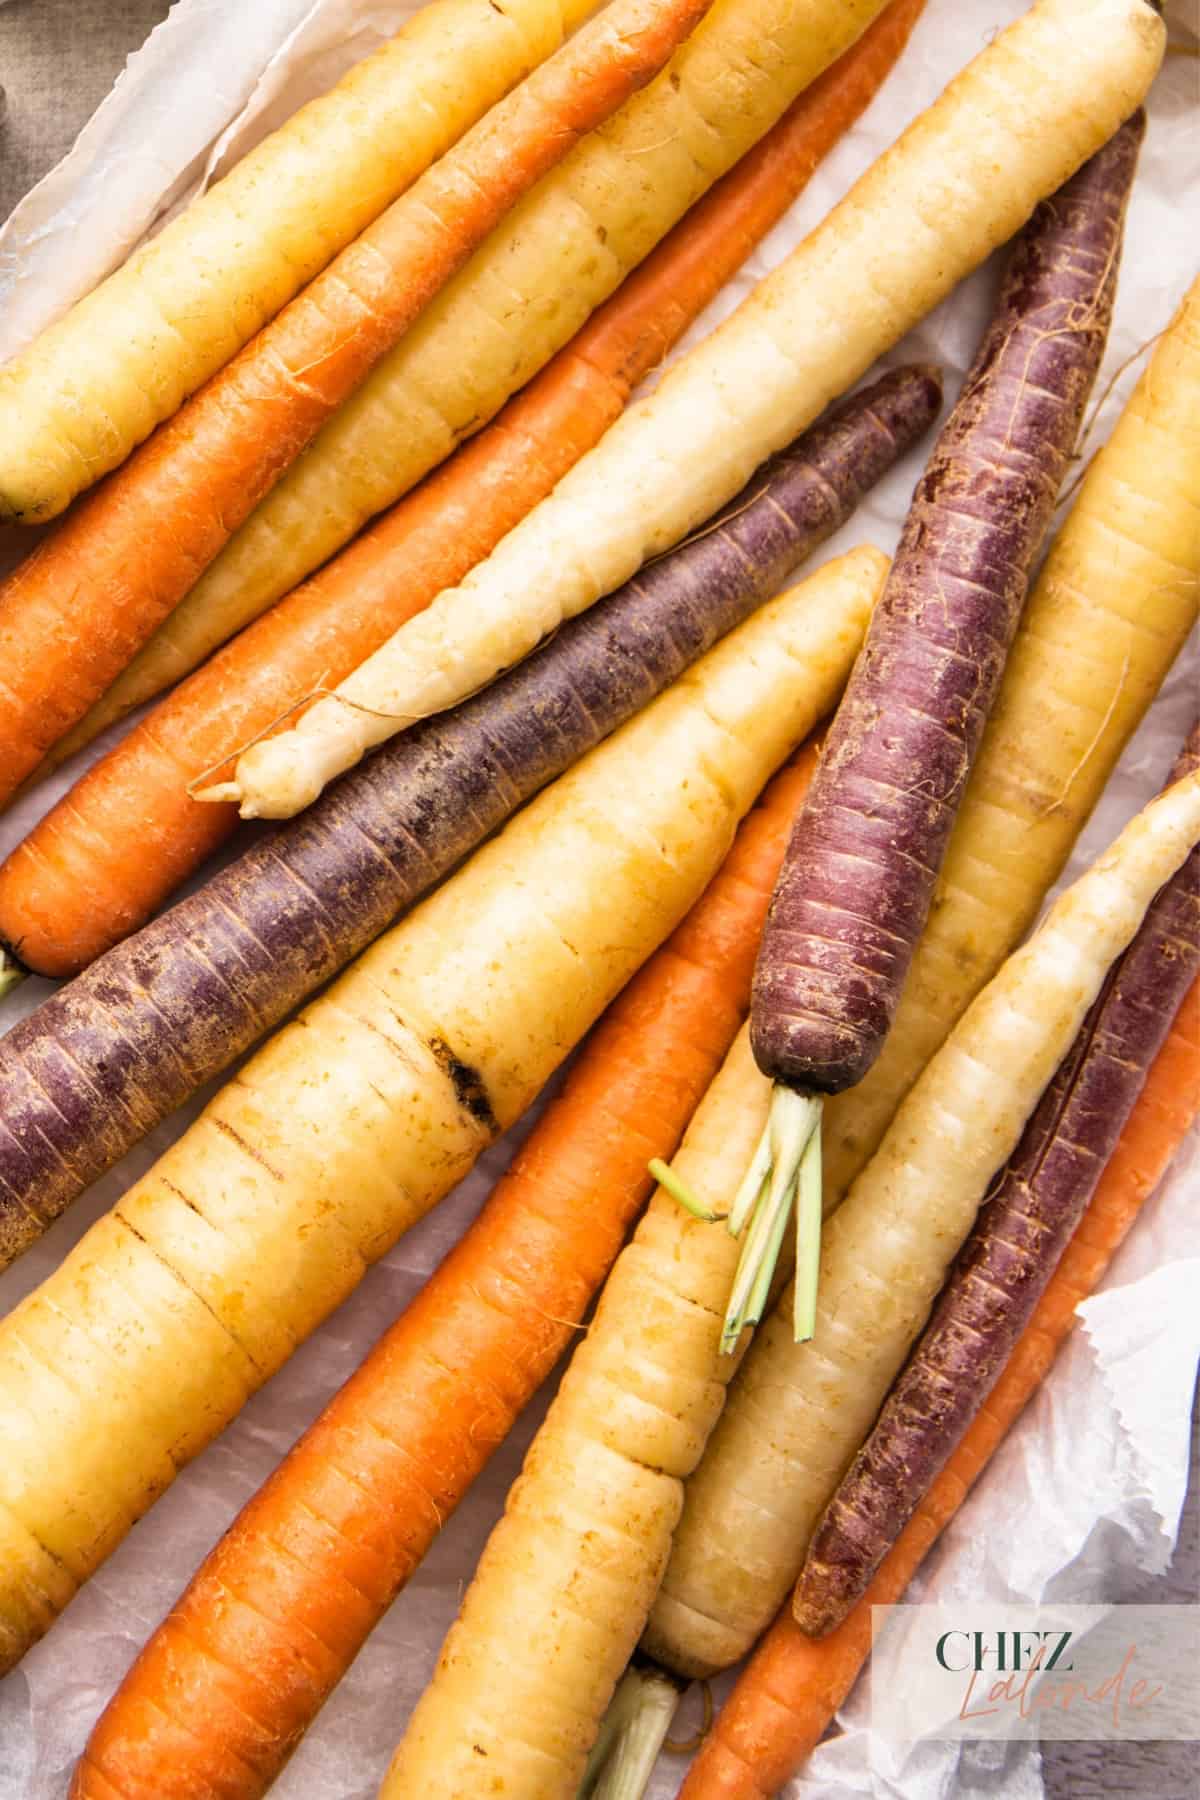 A tray on uncooked rainbow carrots